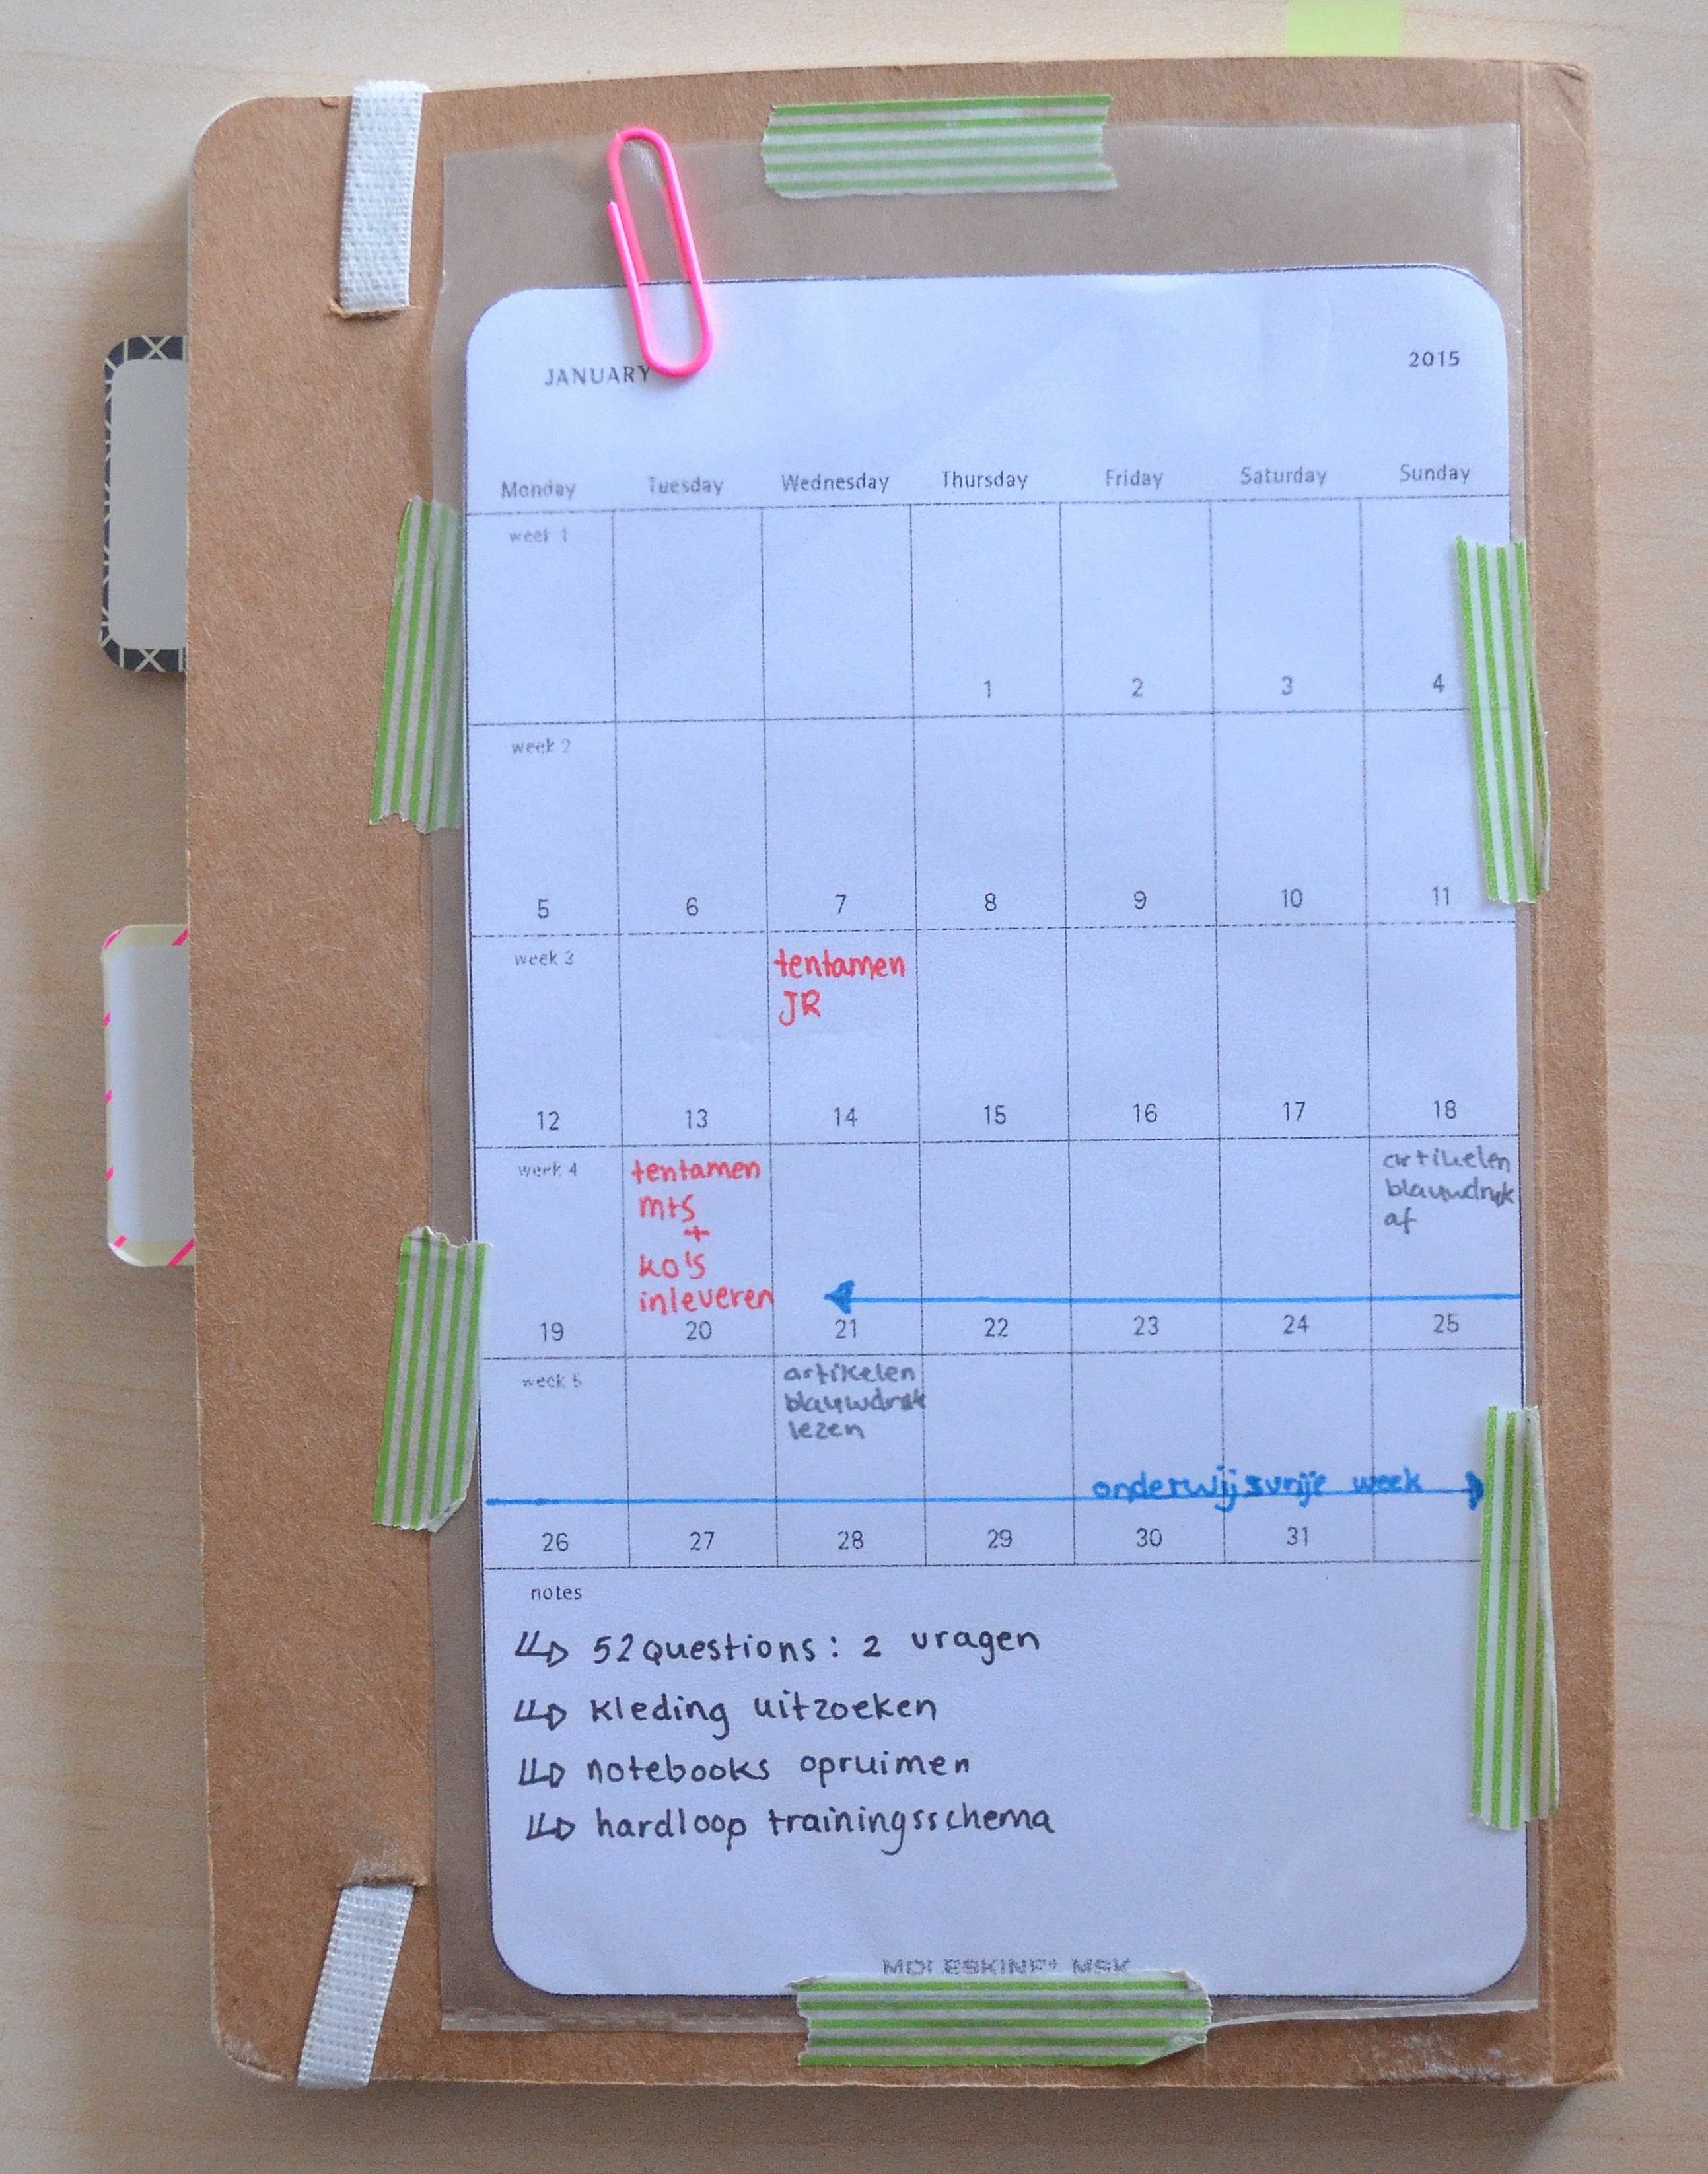 Back of Planner Used for an Overview of the Month